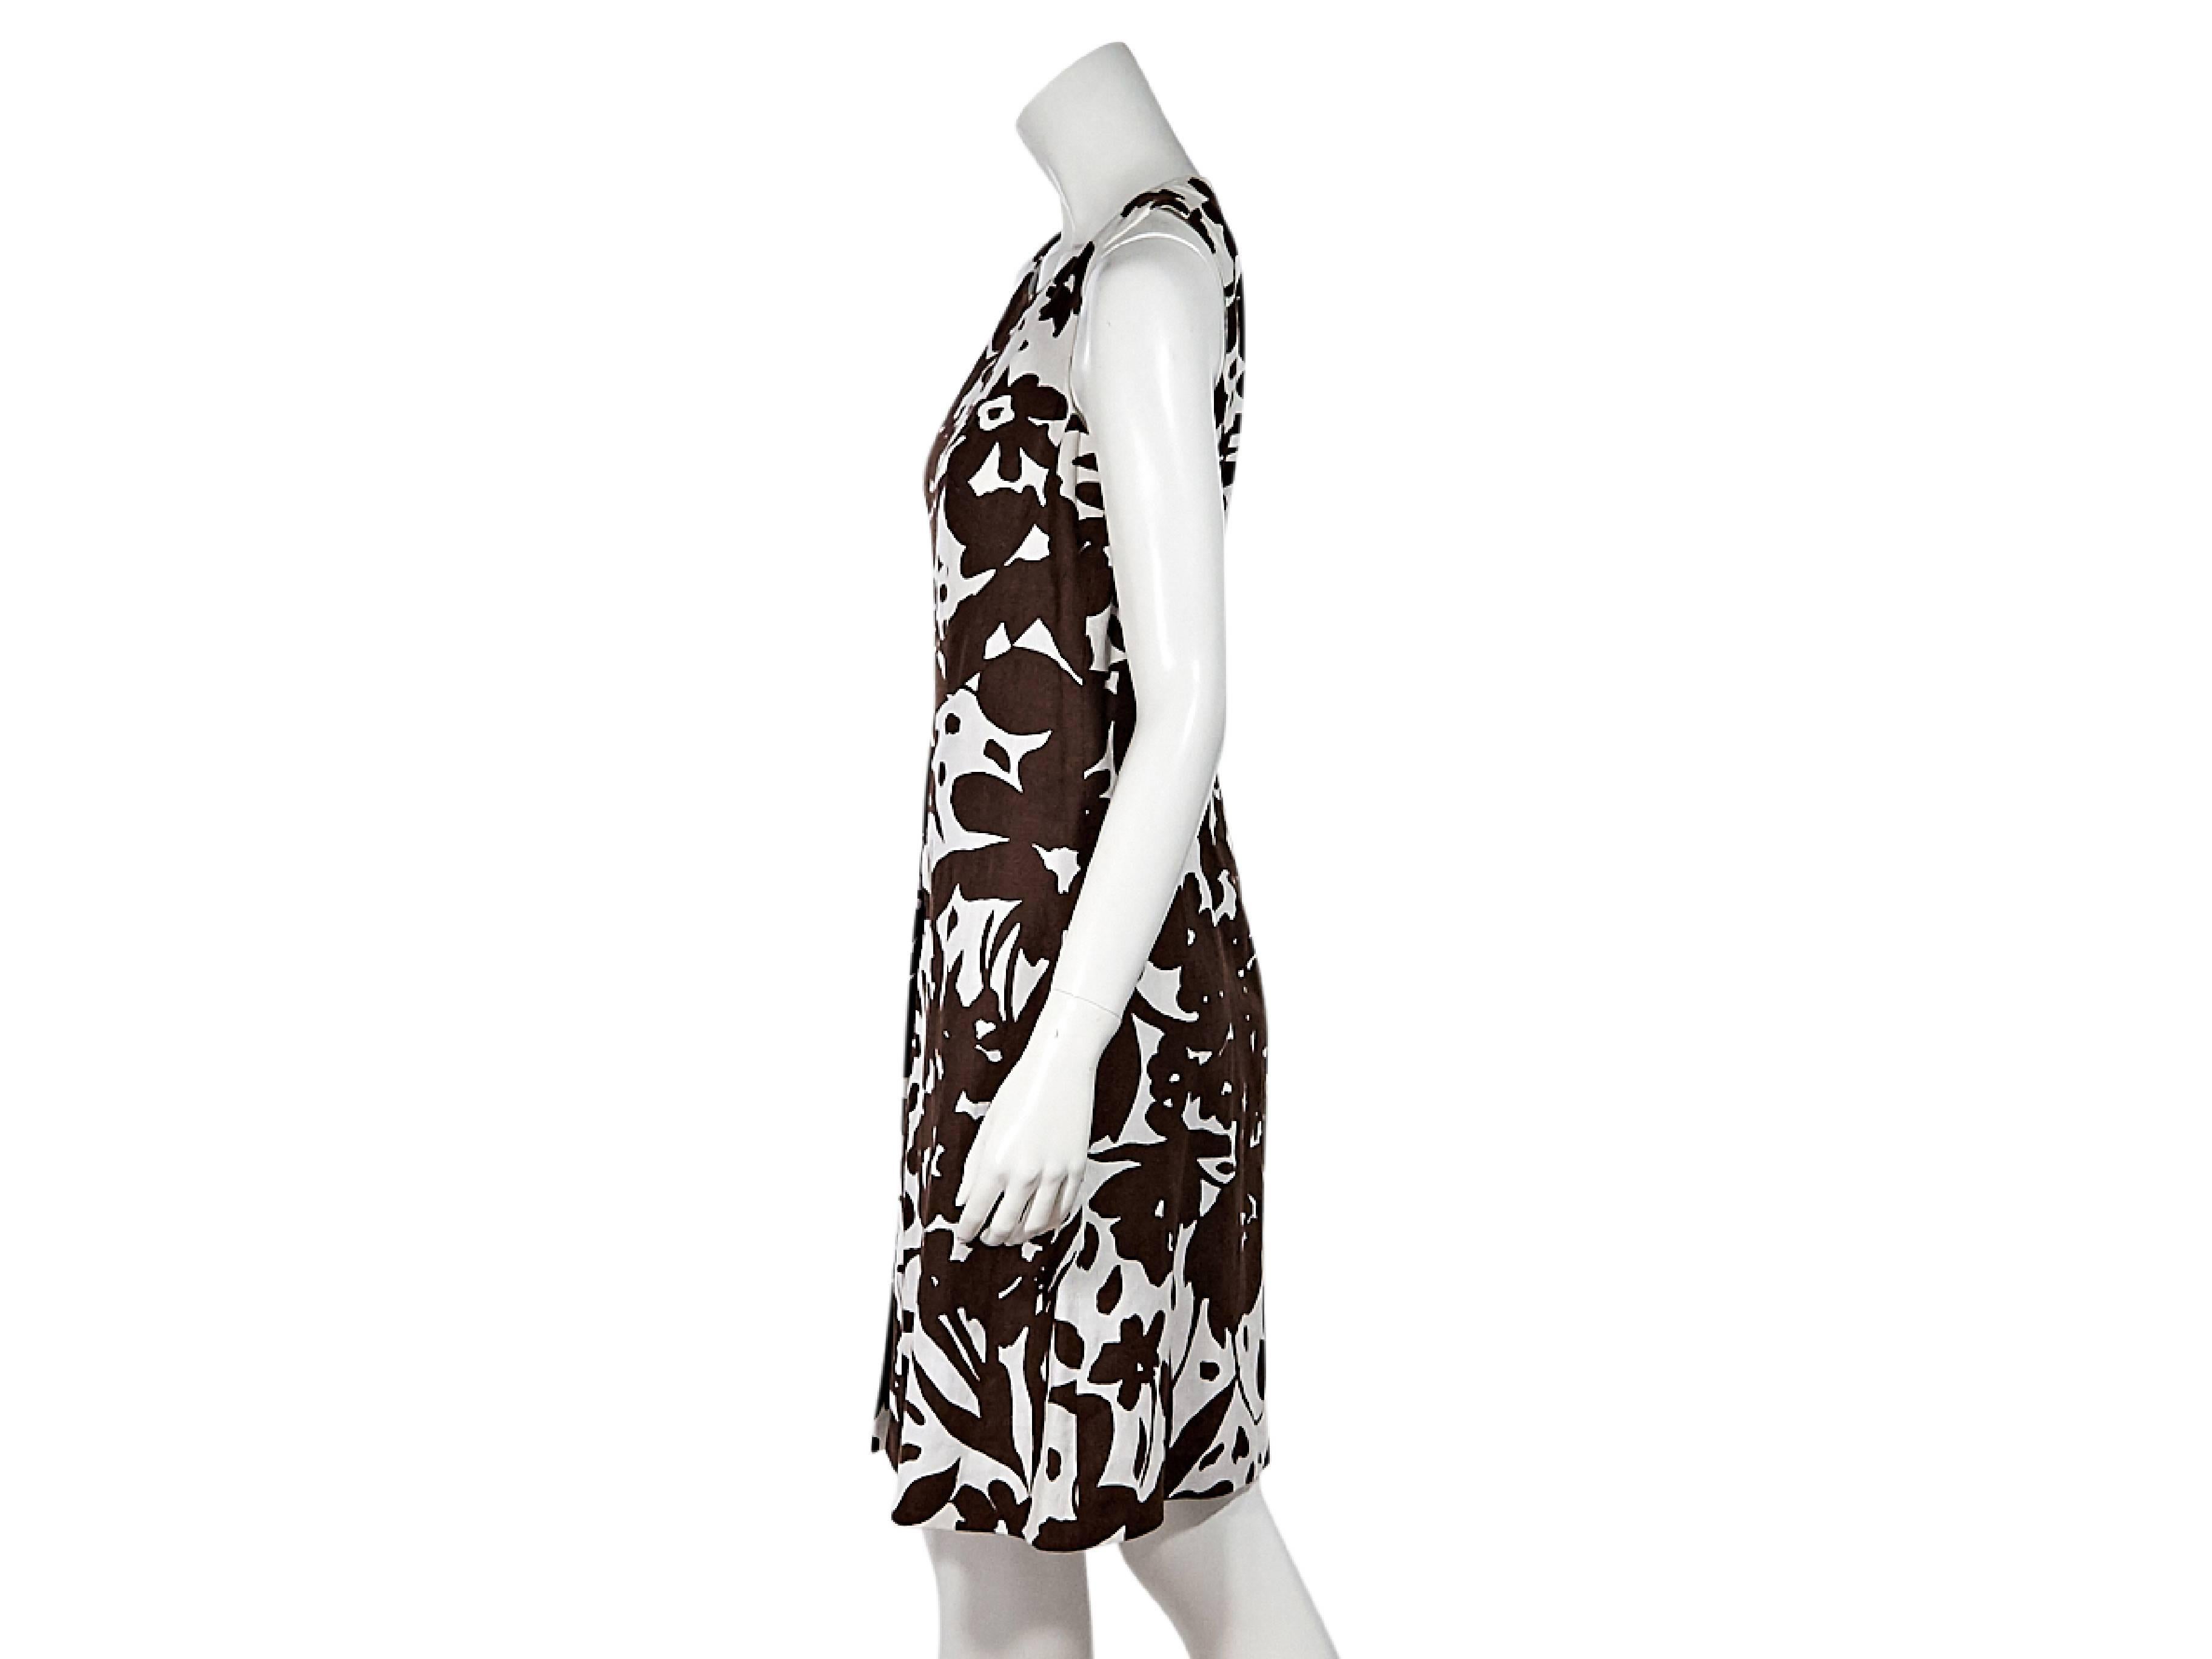 Product details:  Brown and white floral-printed sheath dress by Michael Kors.  Sccopneck.  Sleeveless.  Front box pleat.  Concealed back zip closure.  
Condition: Pre-owned. New with tags.